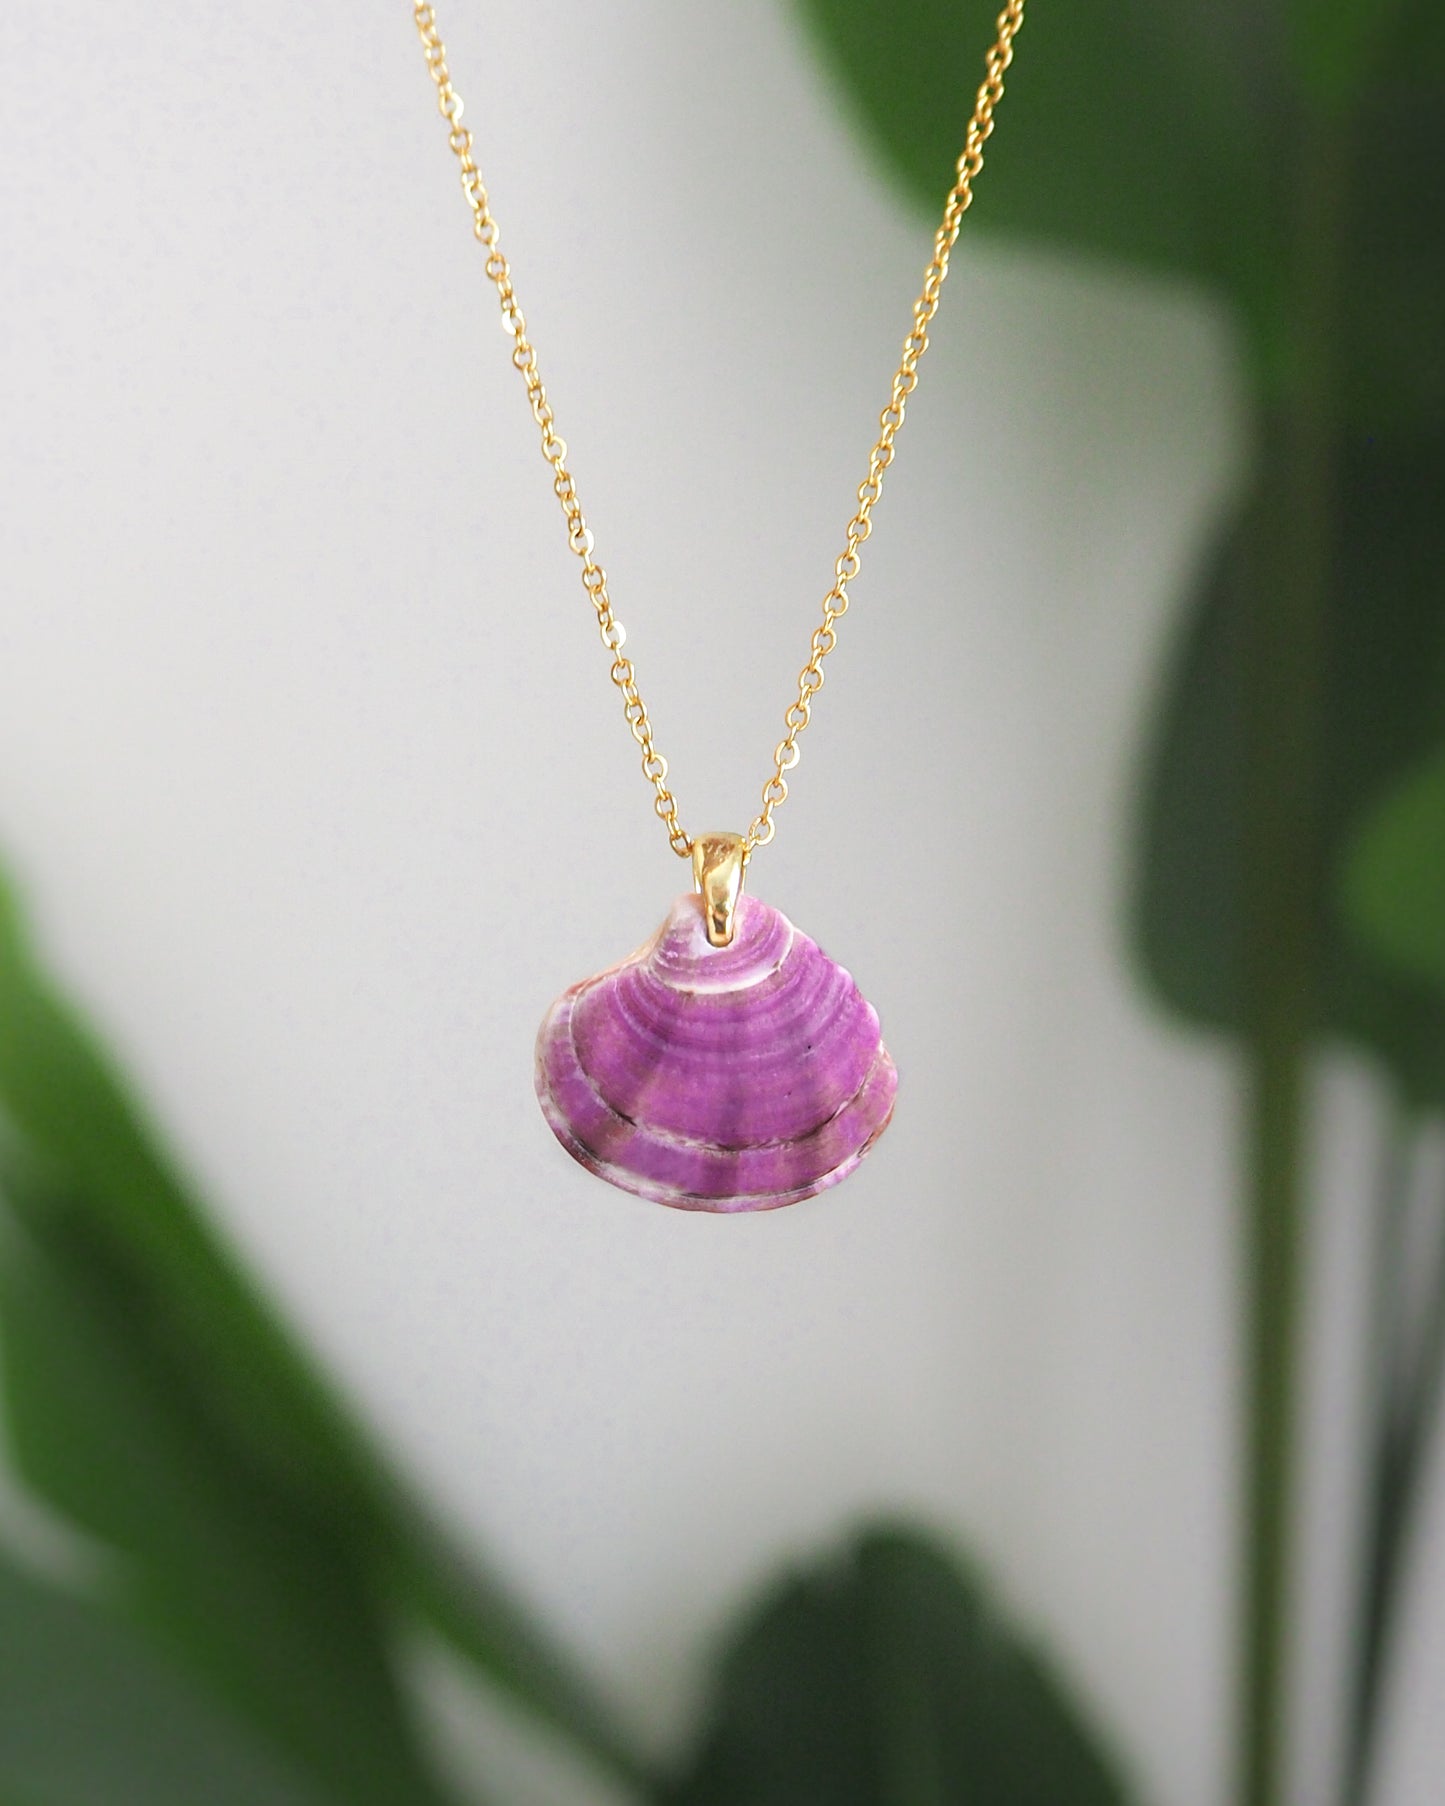 Purple Plum Venus Shell Gold Necklace from Portugal, seabylou ocean inspired jewelry, real shell necklace